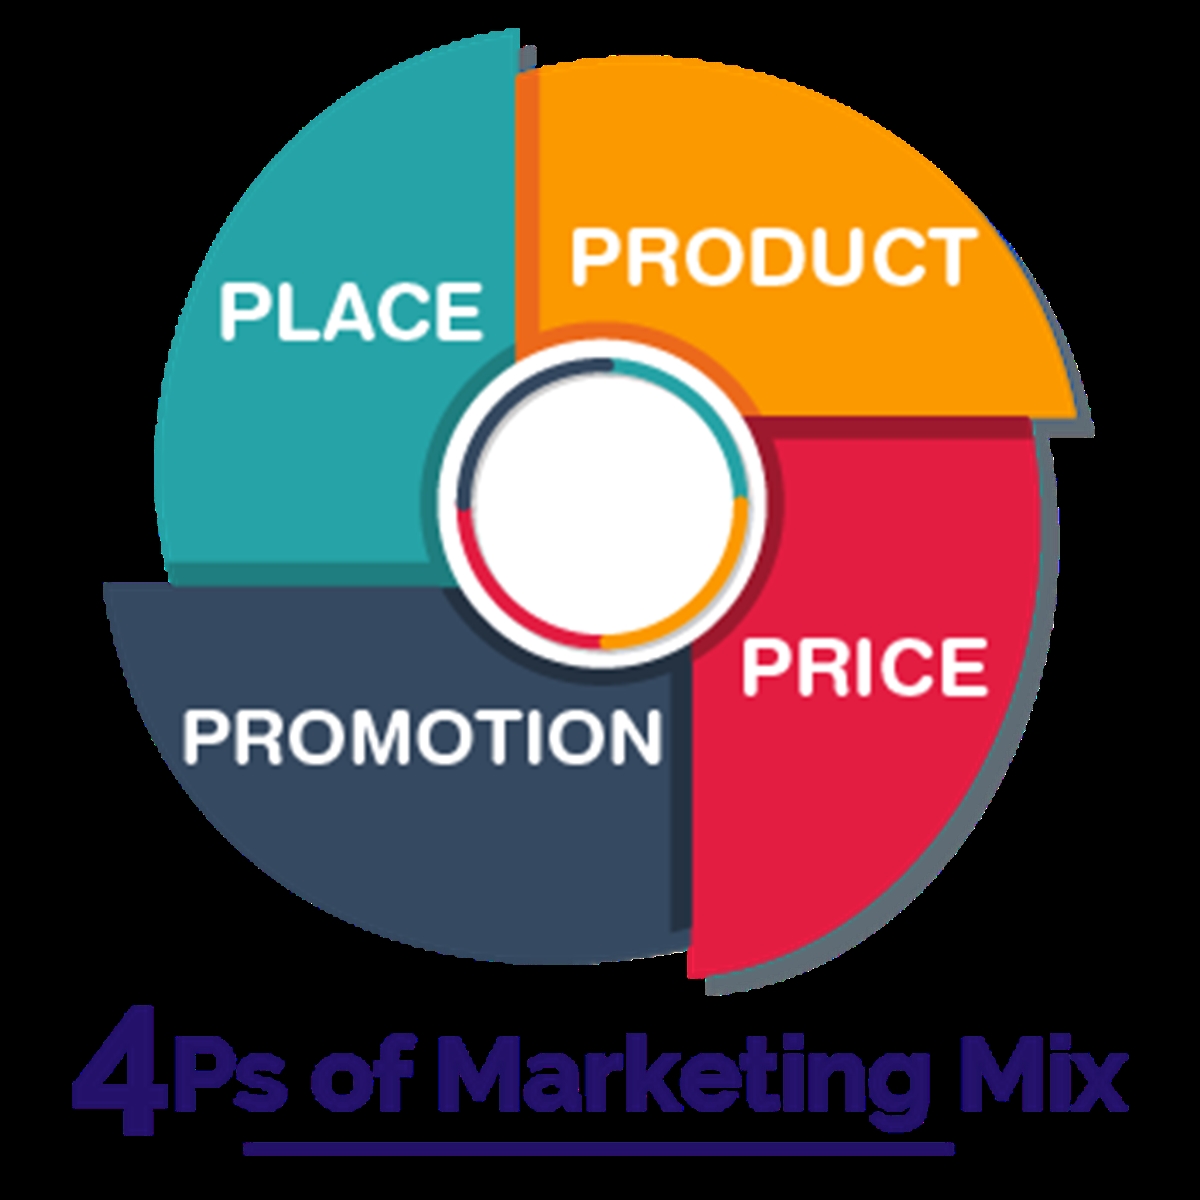 What Is Marketing Mix?